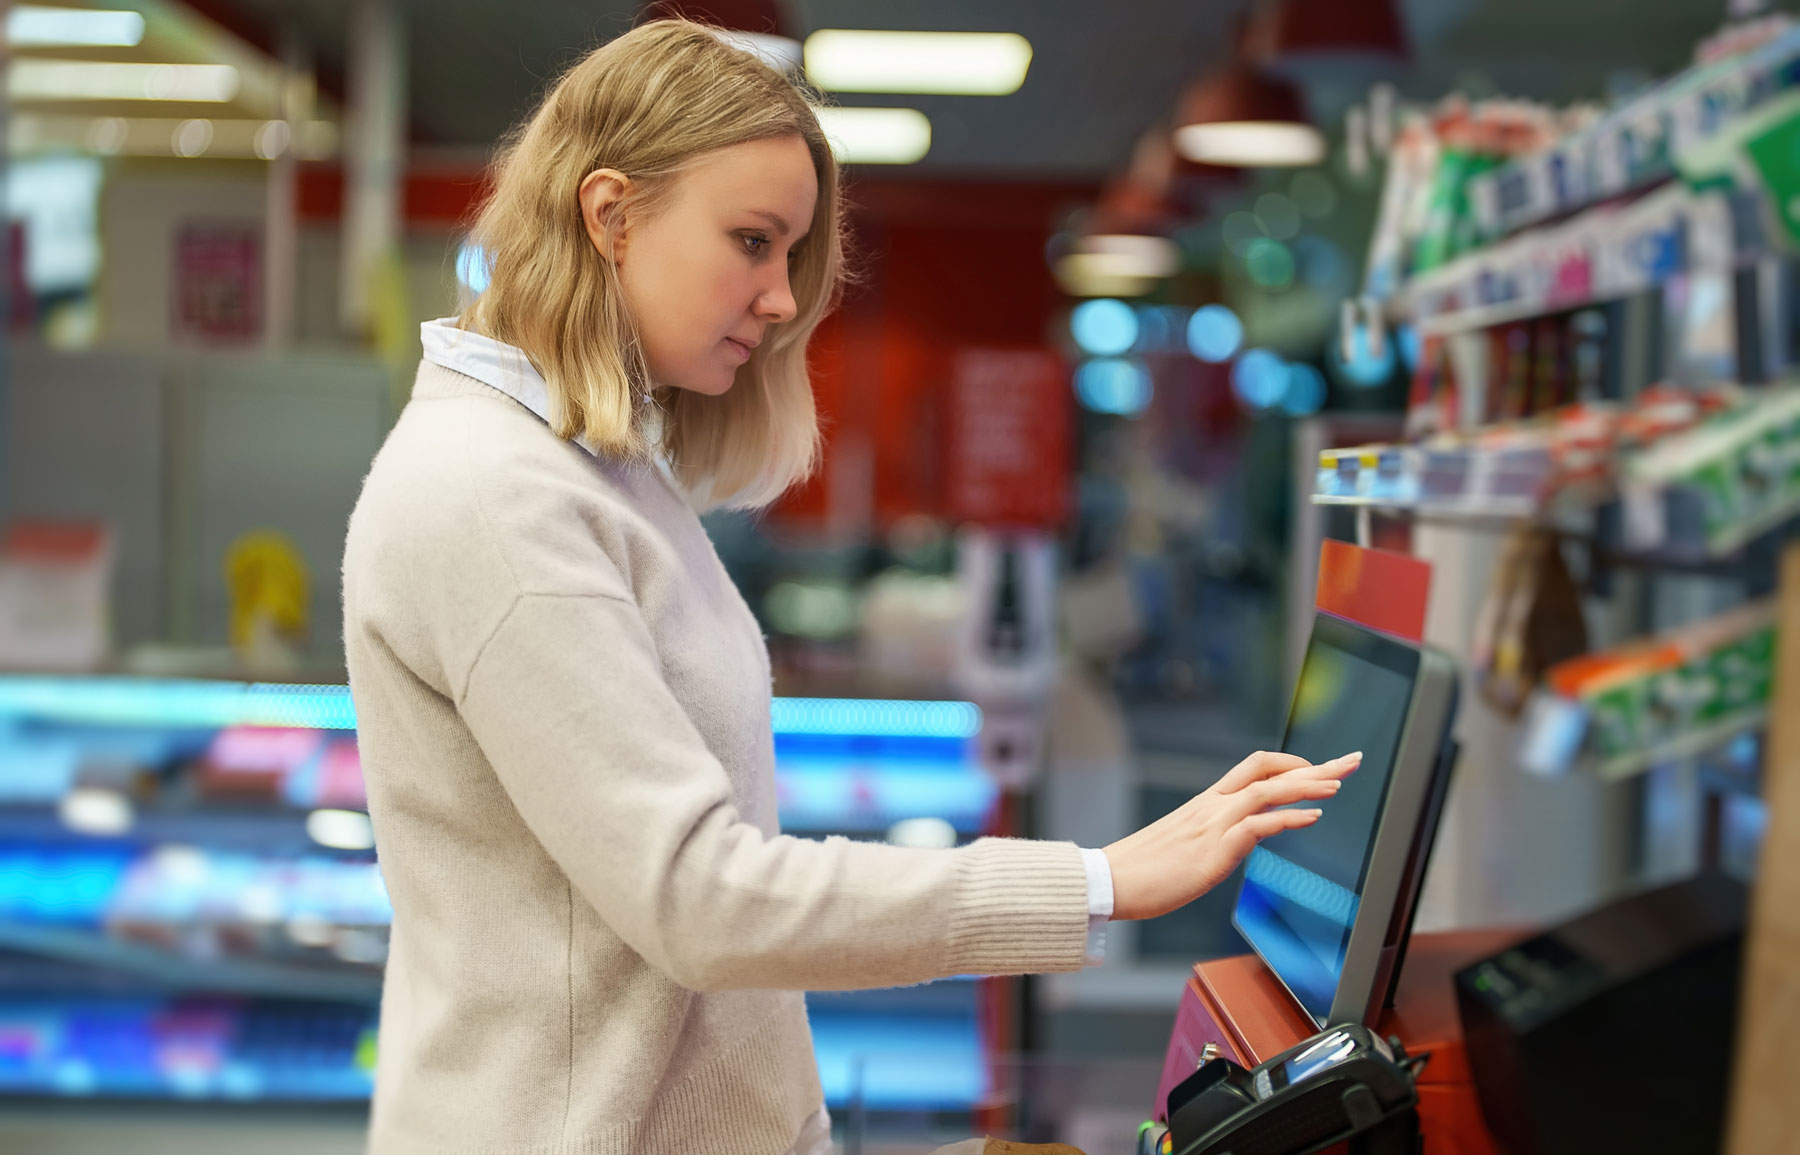 Woman pays at self-checkouts in supermarket